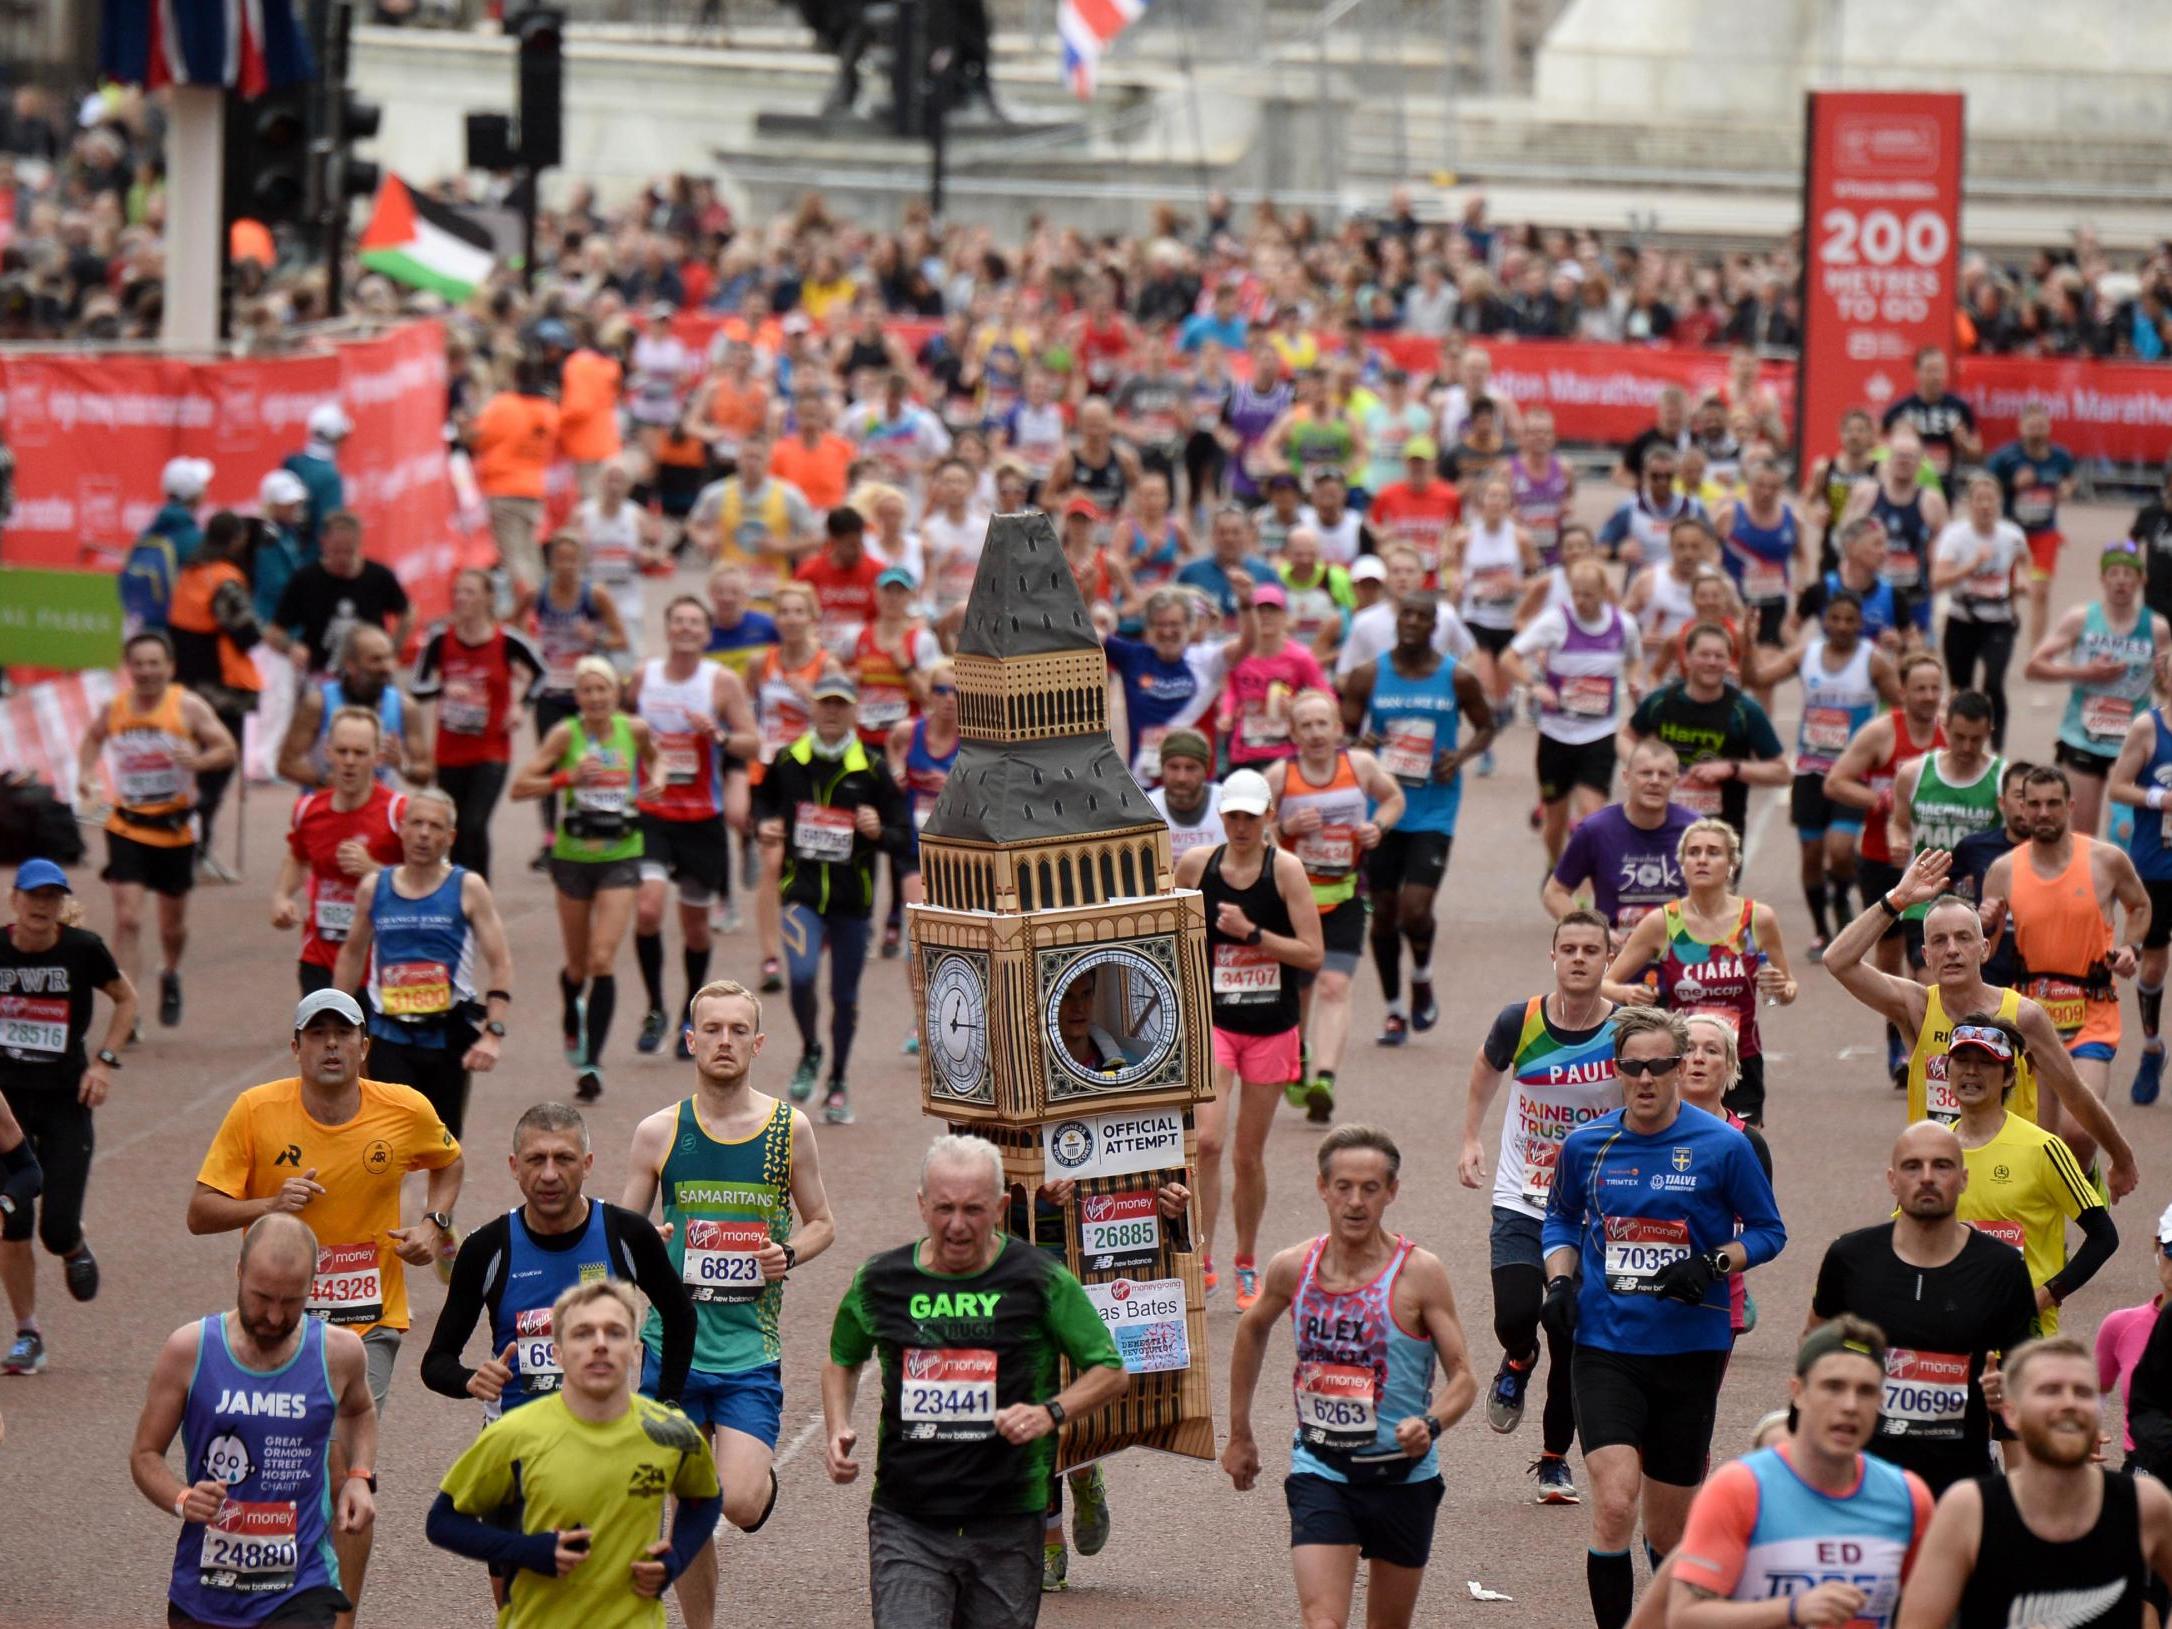 The London Marathon will have more than 40,000 runners